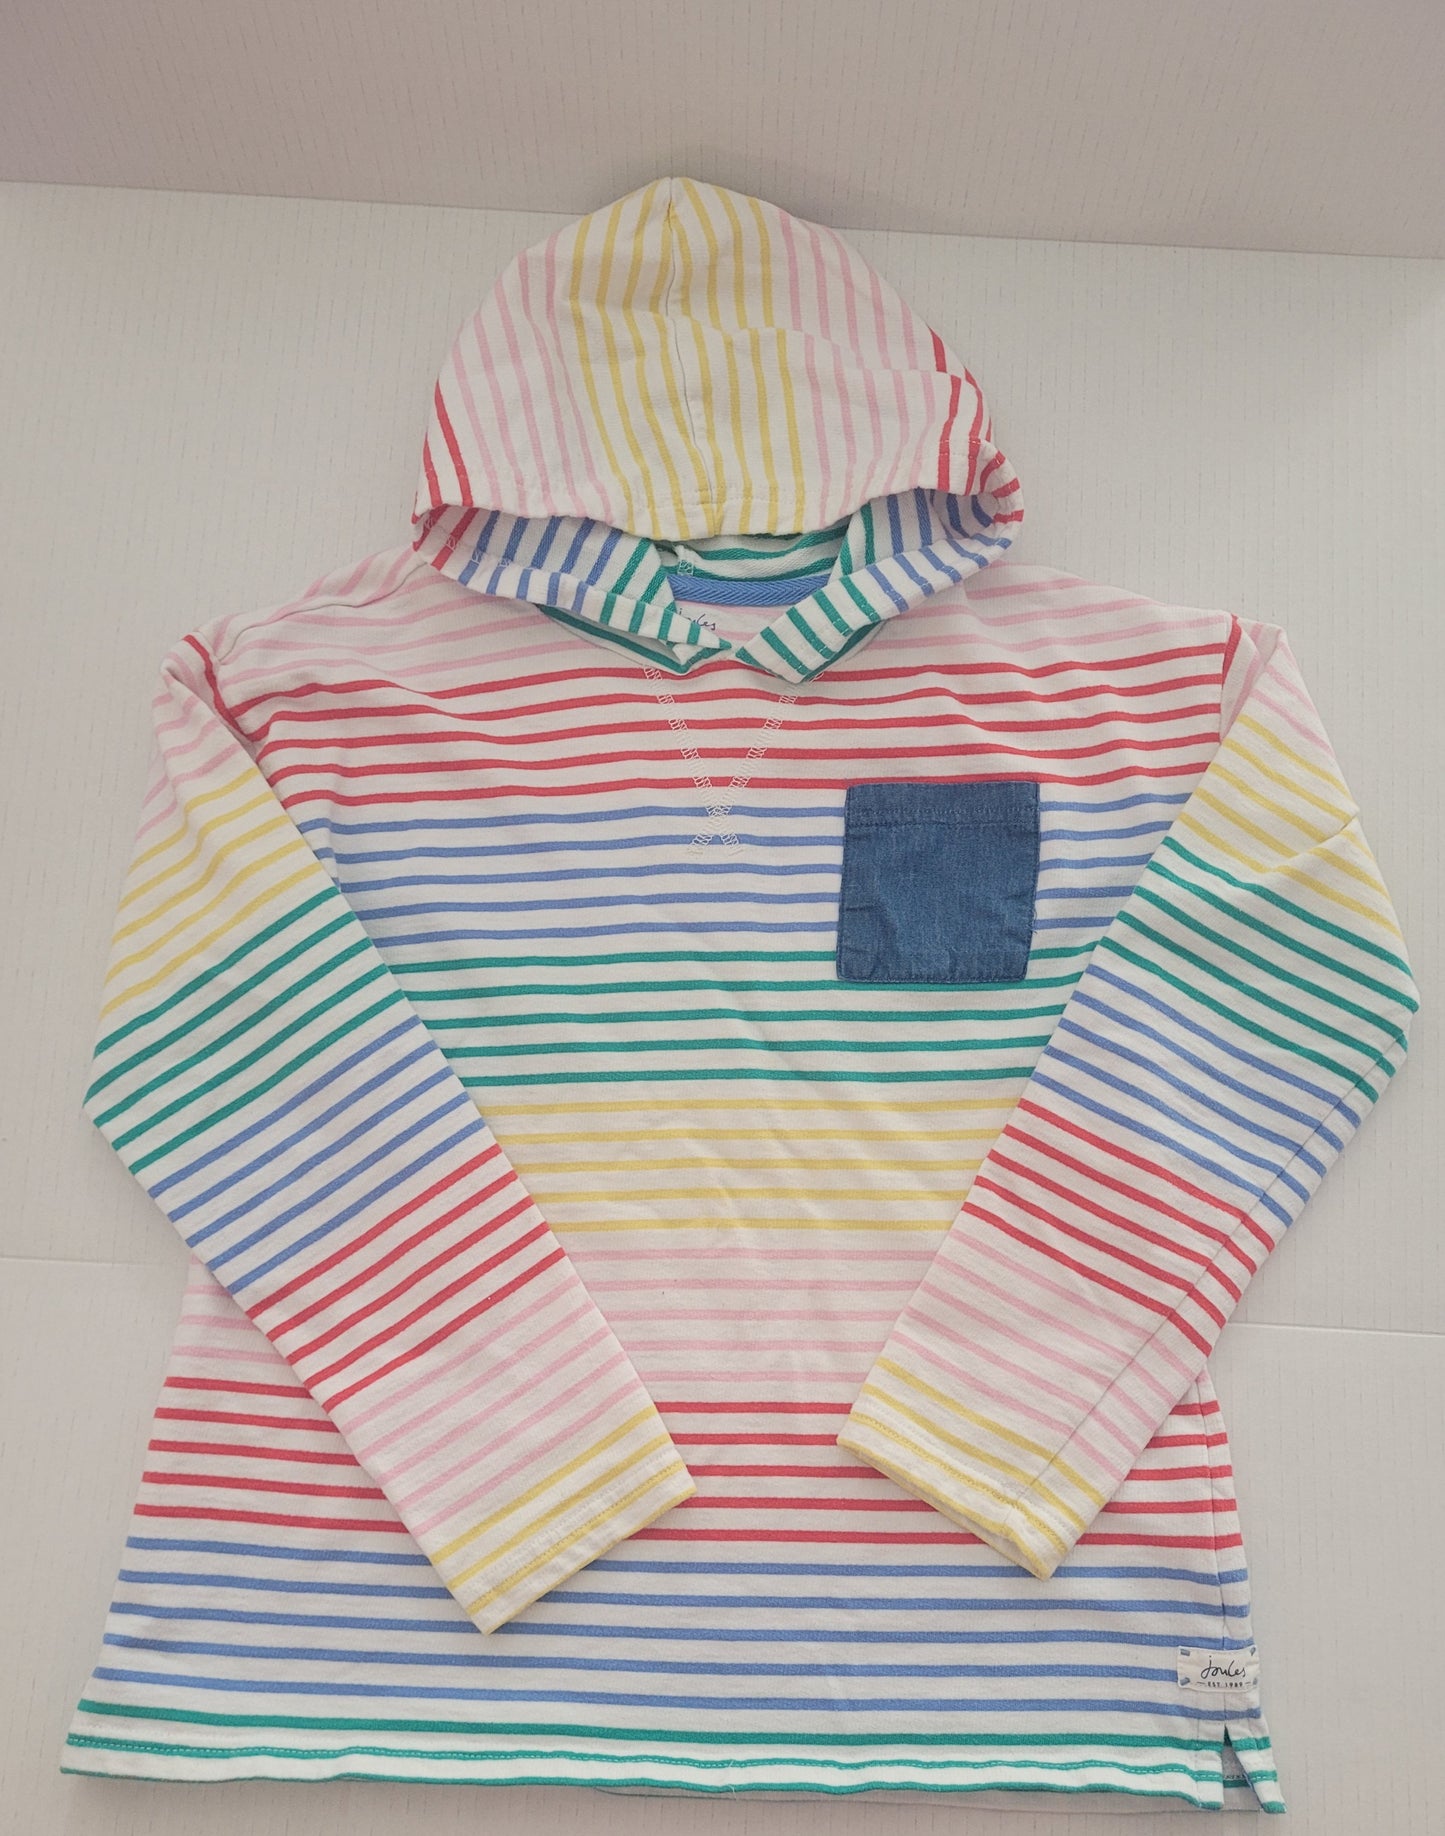 Joules Girls Rainbow Striped Hooded Top Size 12Y